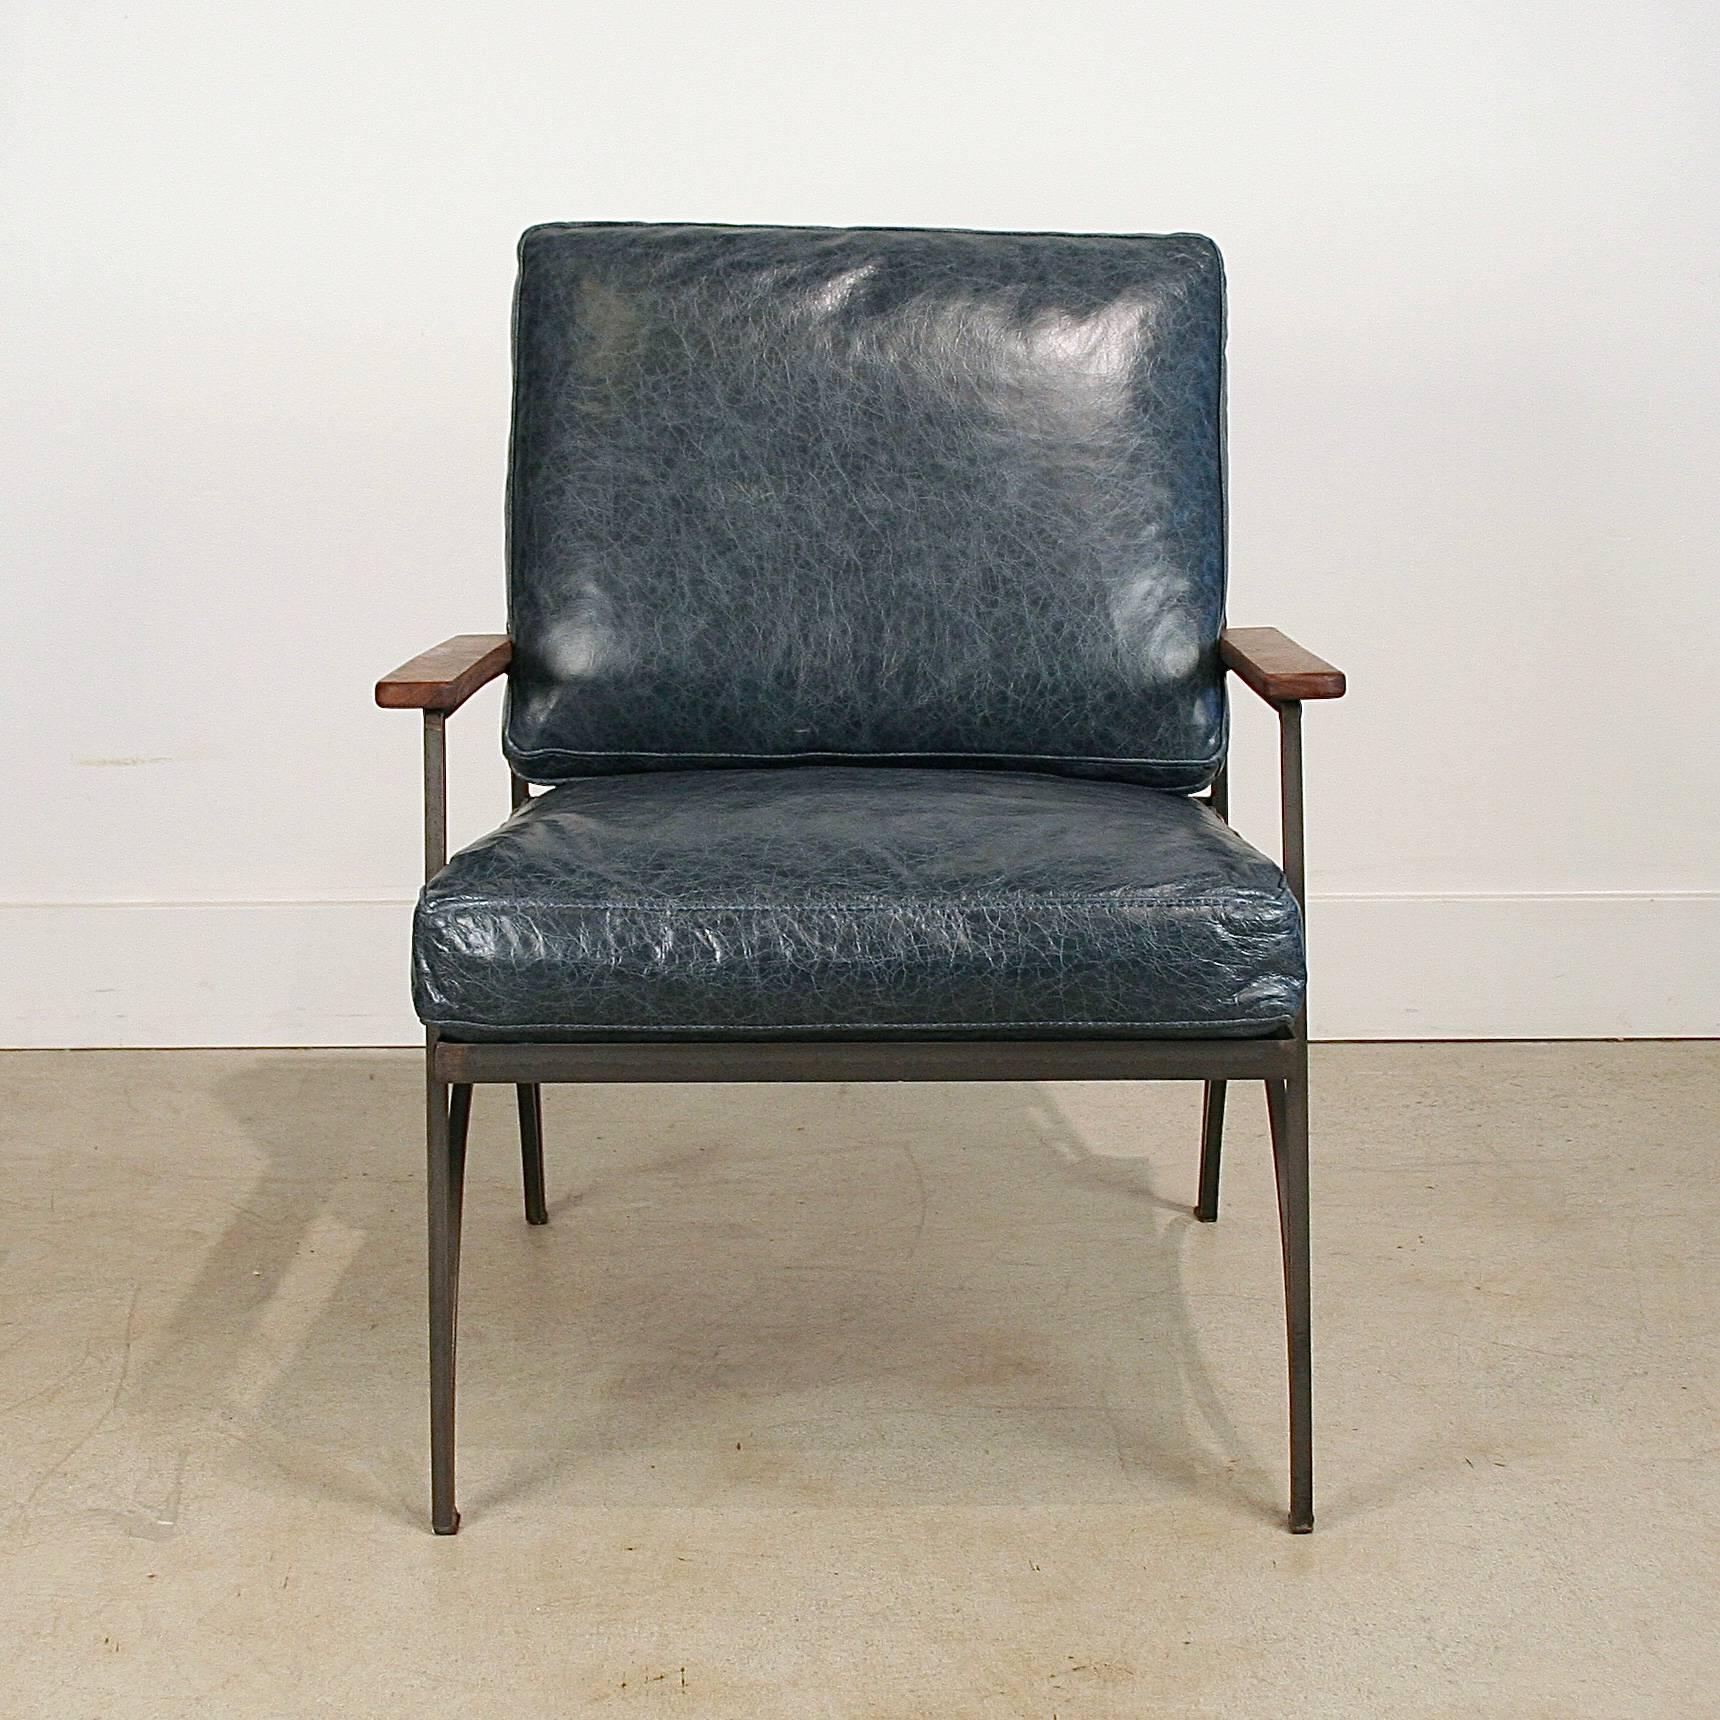 Bronson blue Italian leather cushioned Dean chair sculpted in metal, finished with solid walnut armrests. Made in Los Angeles.